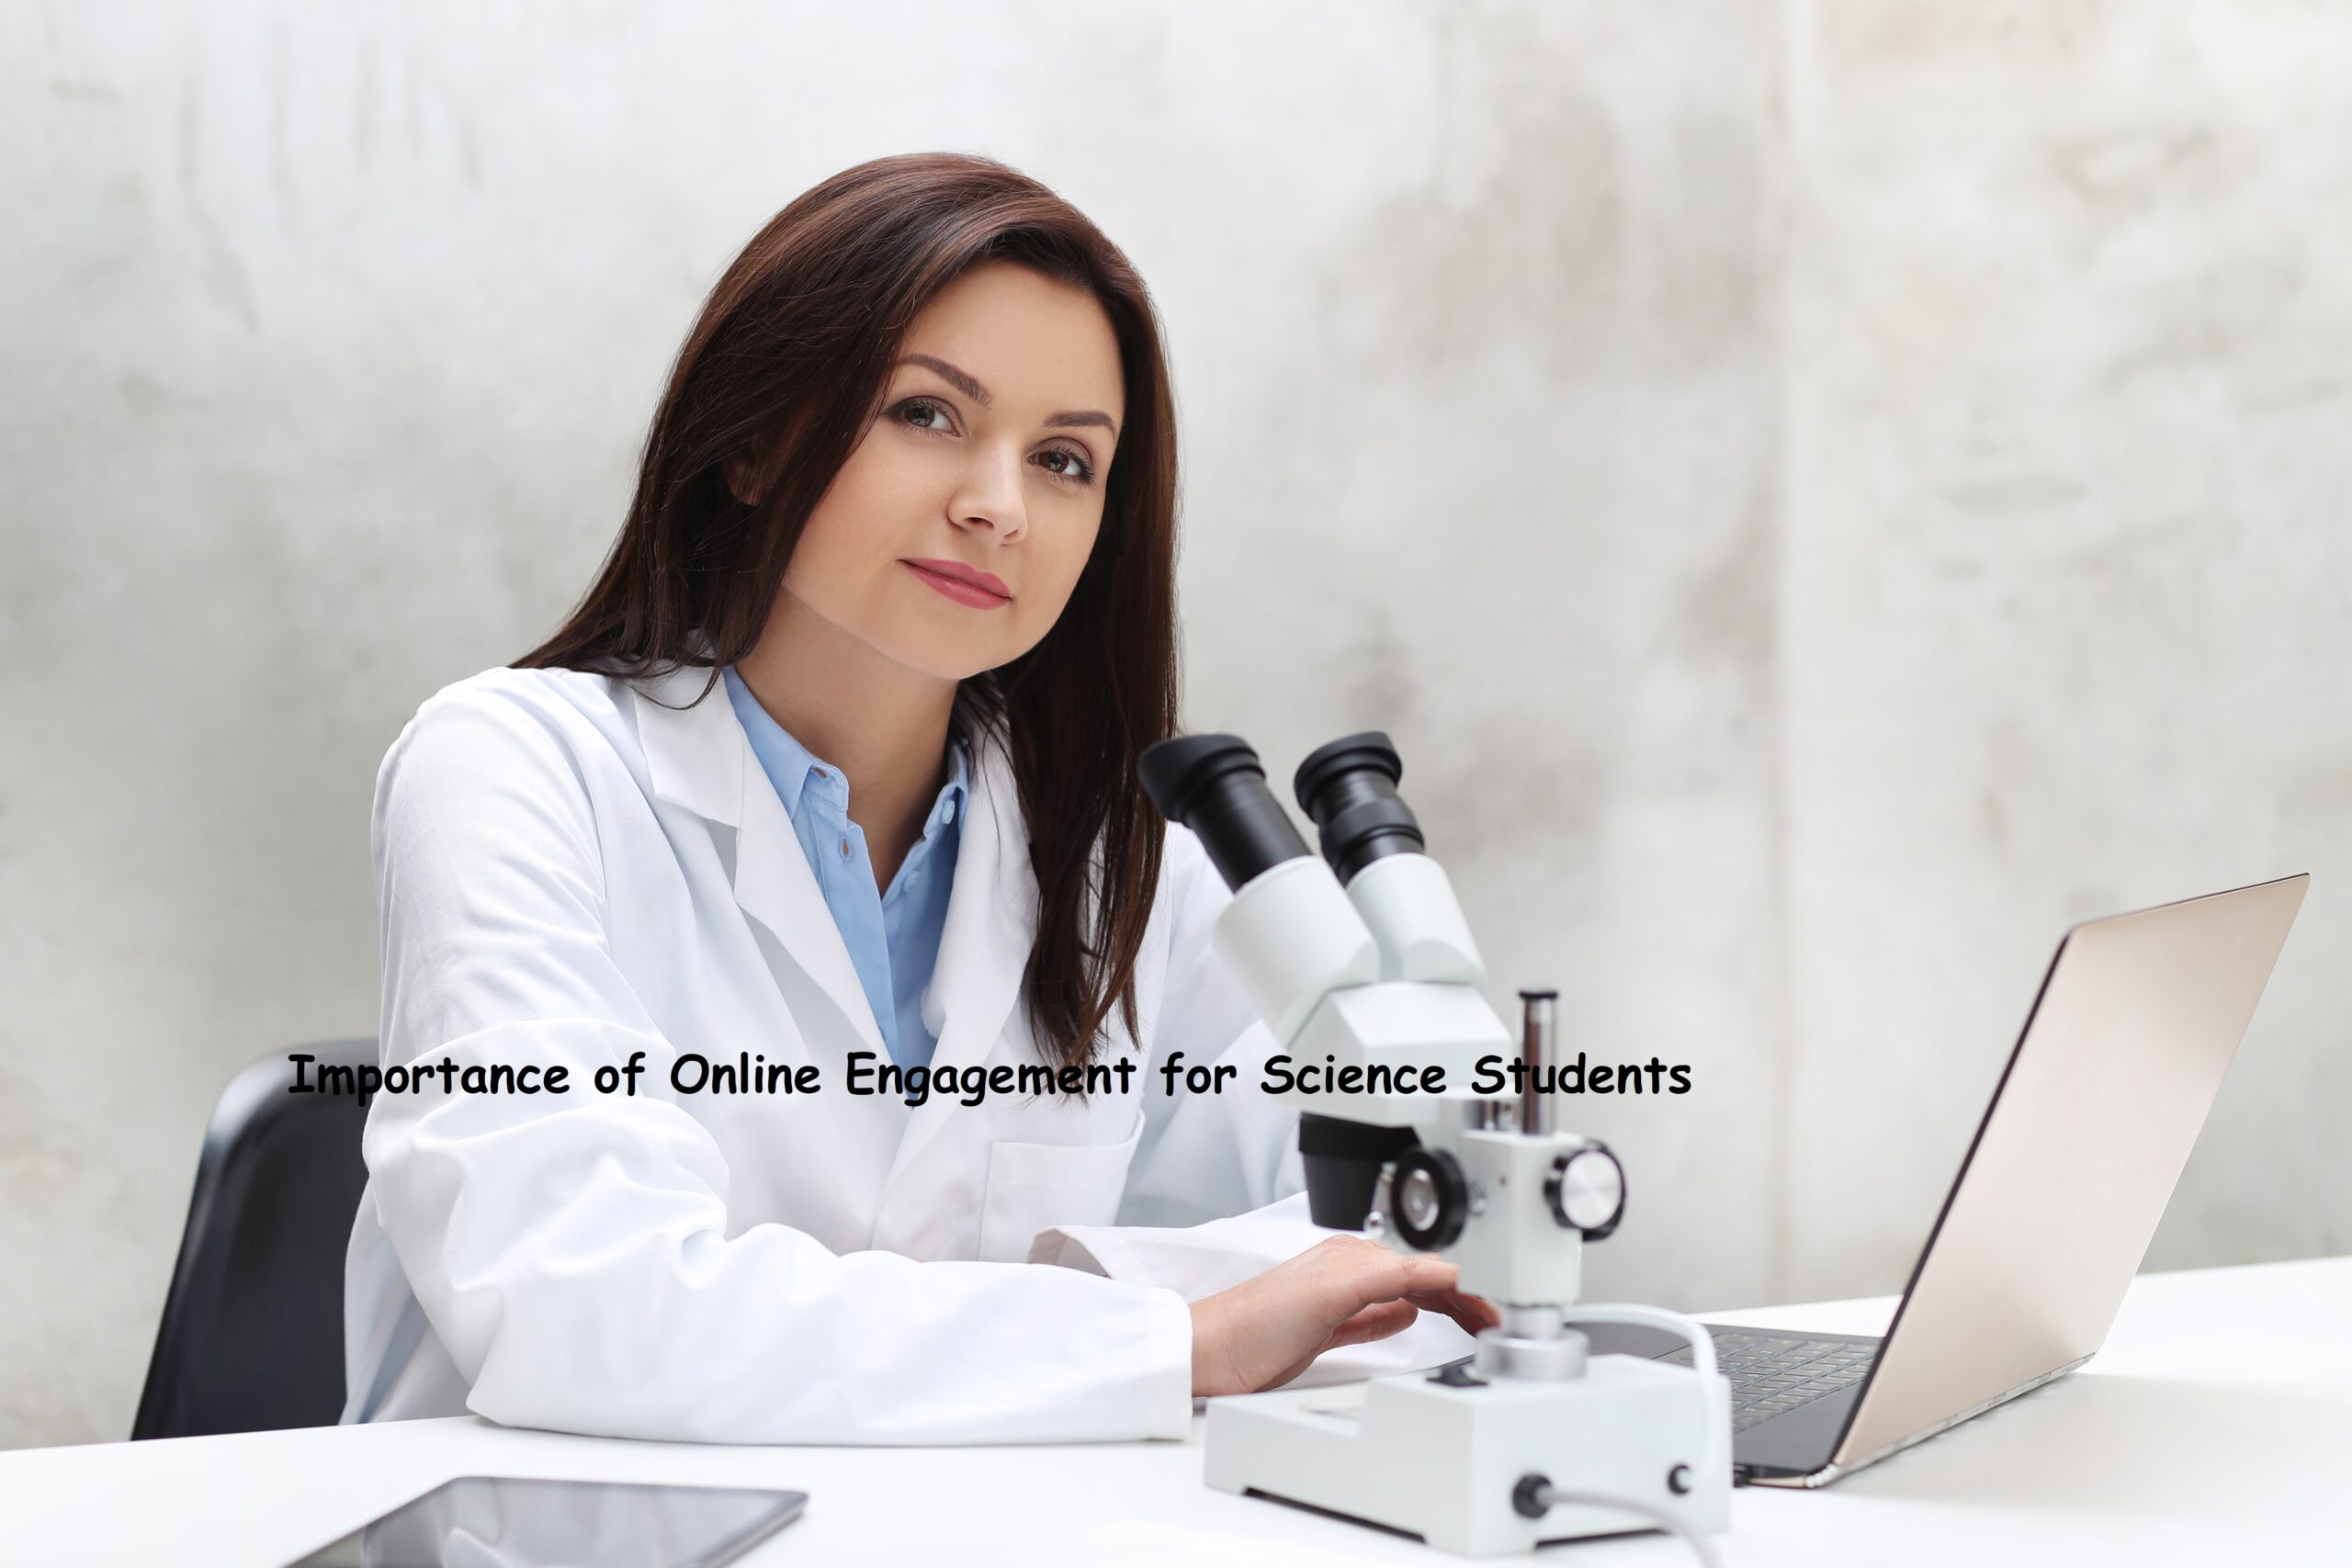 Importance of Online Engagement for Science Students